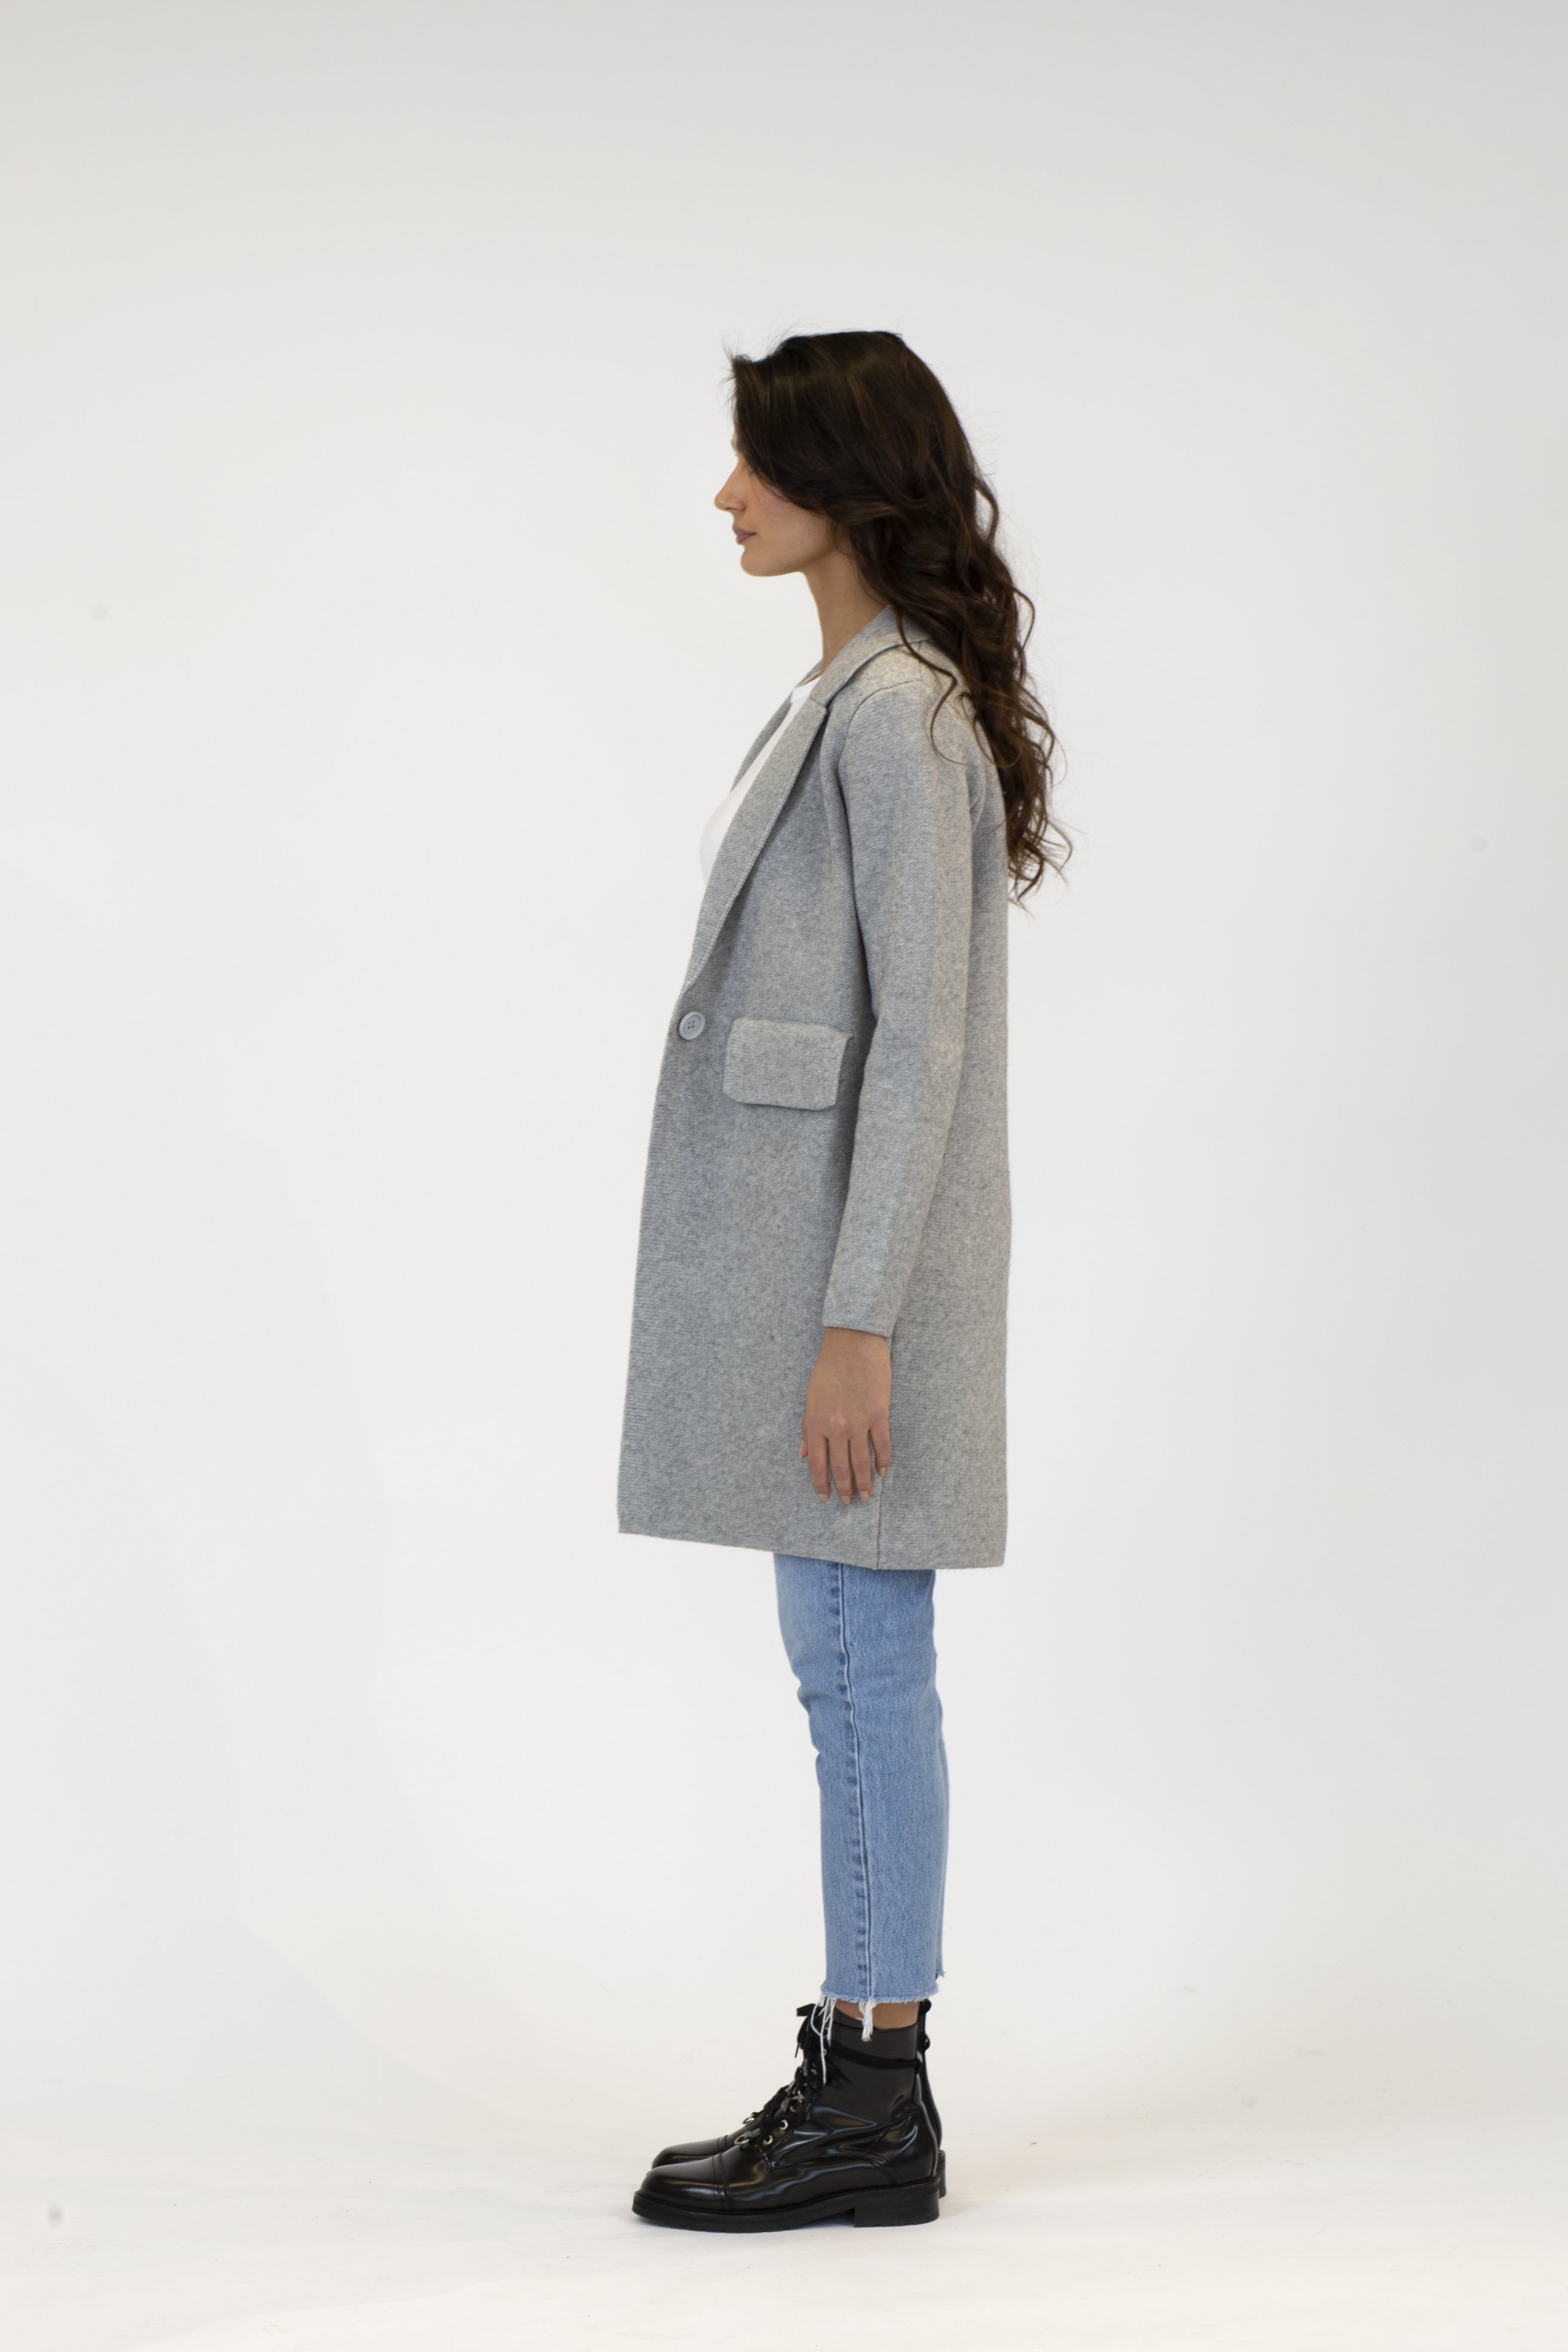 Lyla + Luxe Fiona Fitted Knit Coat